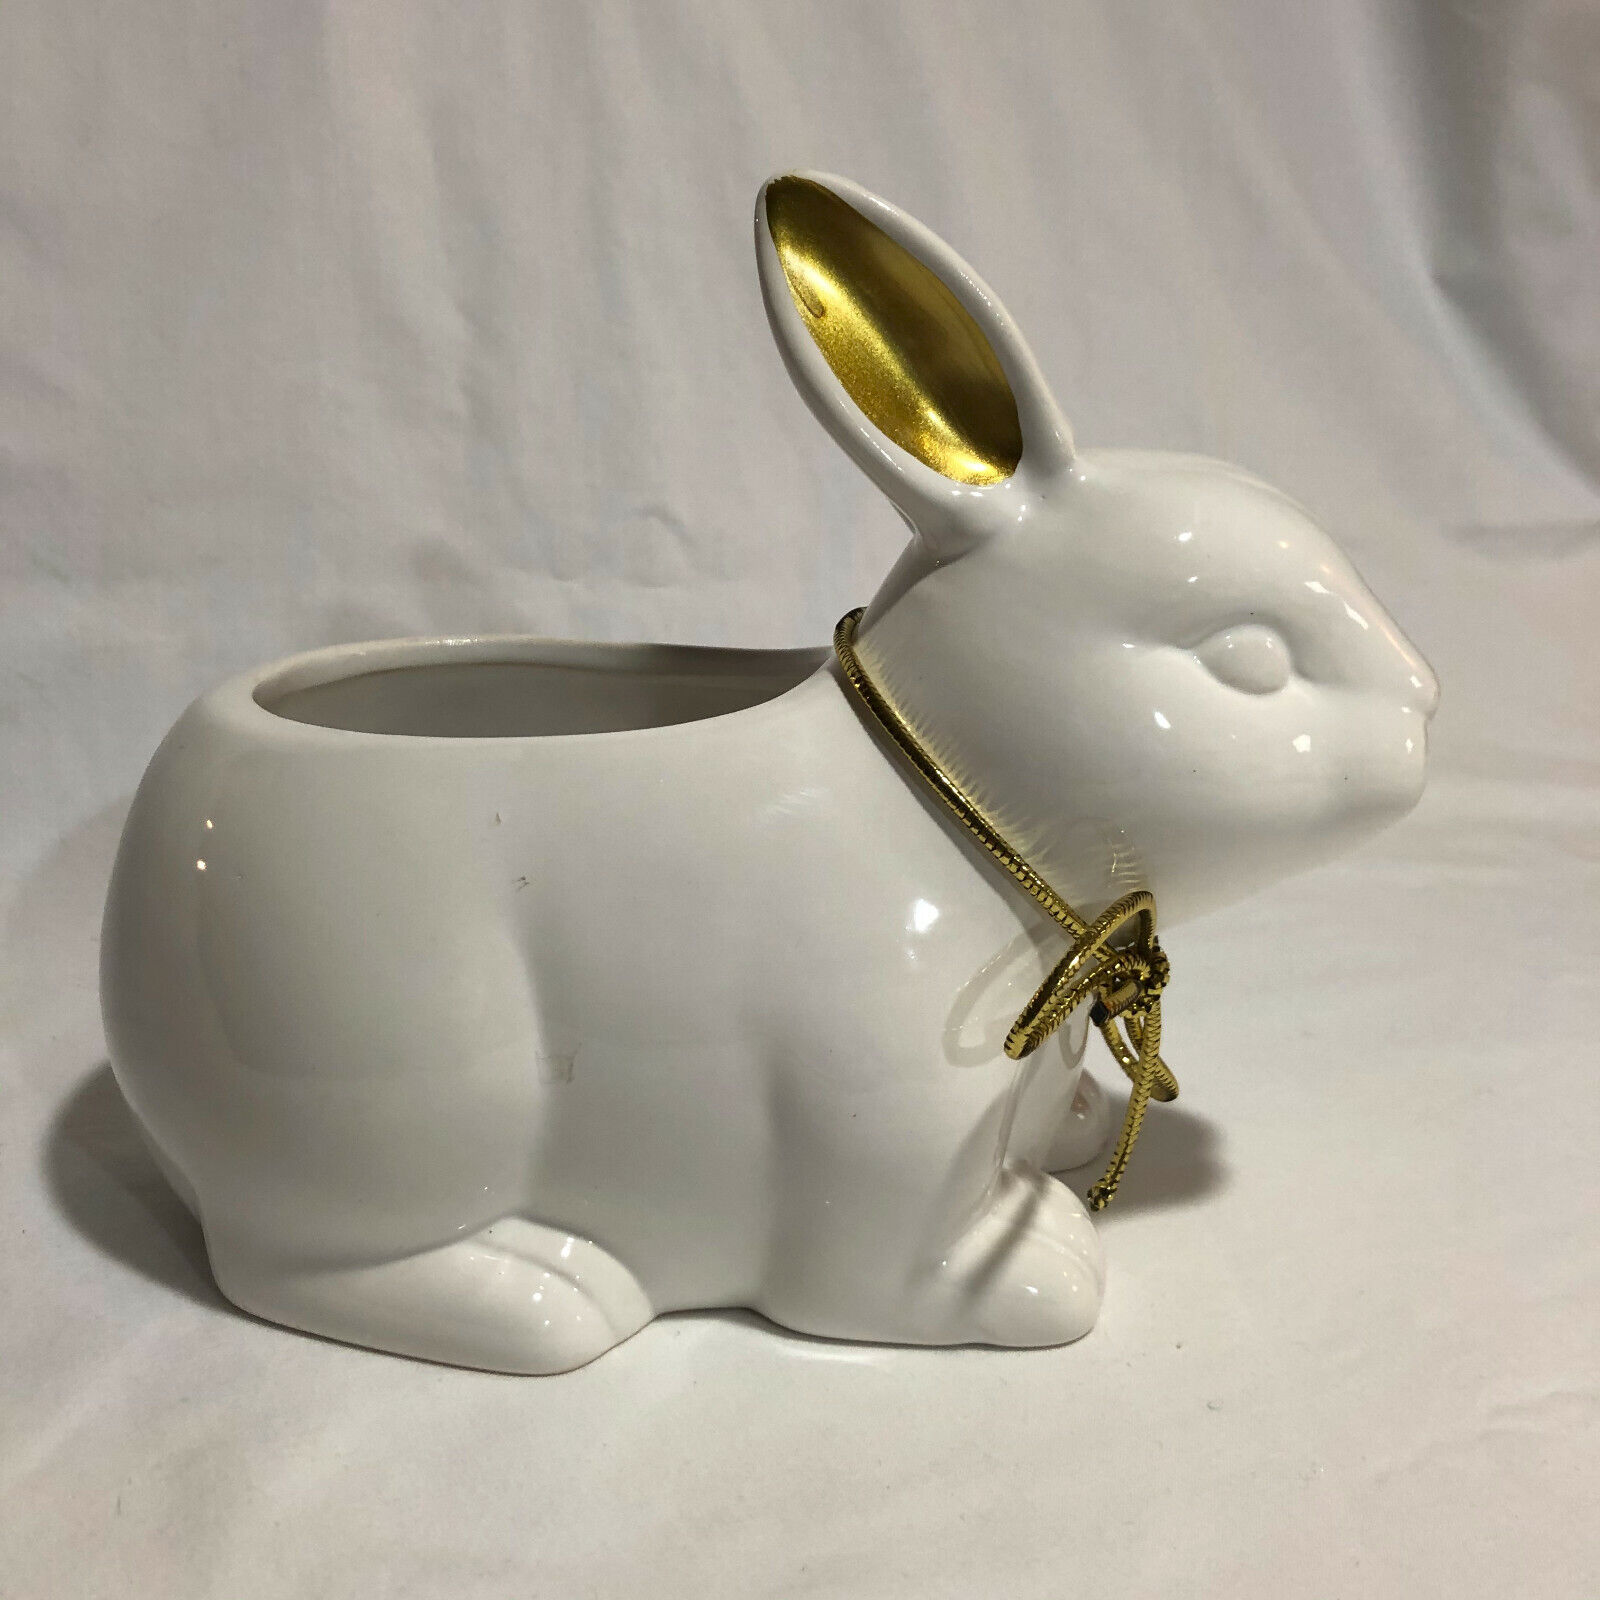 Maud Borup White Rabbit Ceramic Planter with Gold Ears Ready for EASTER